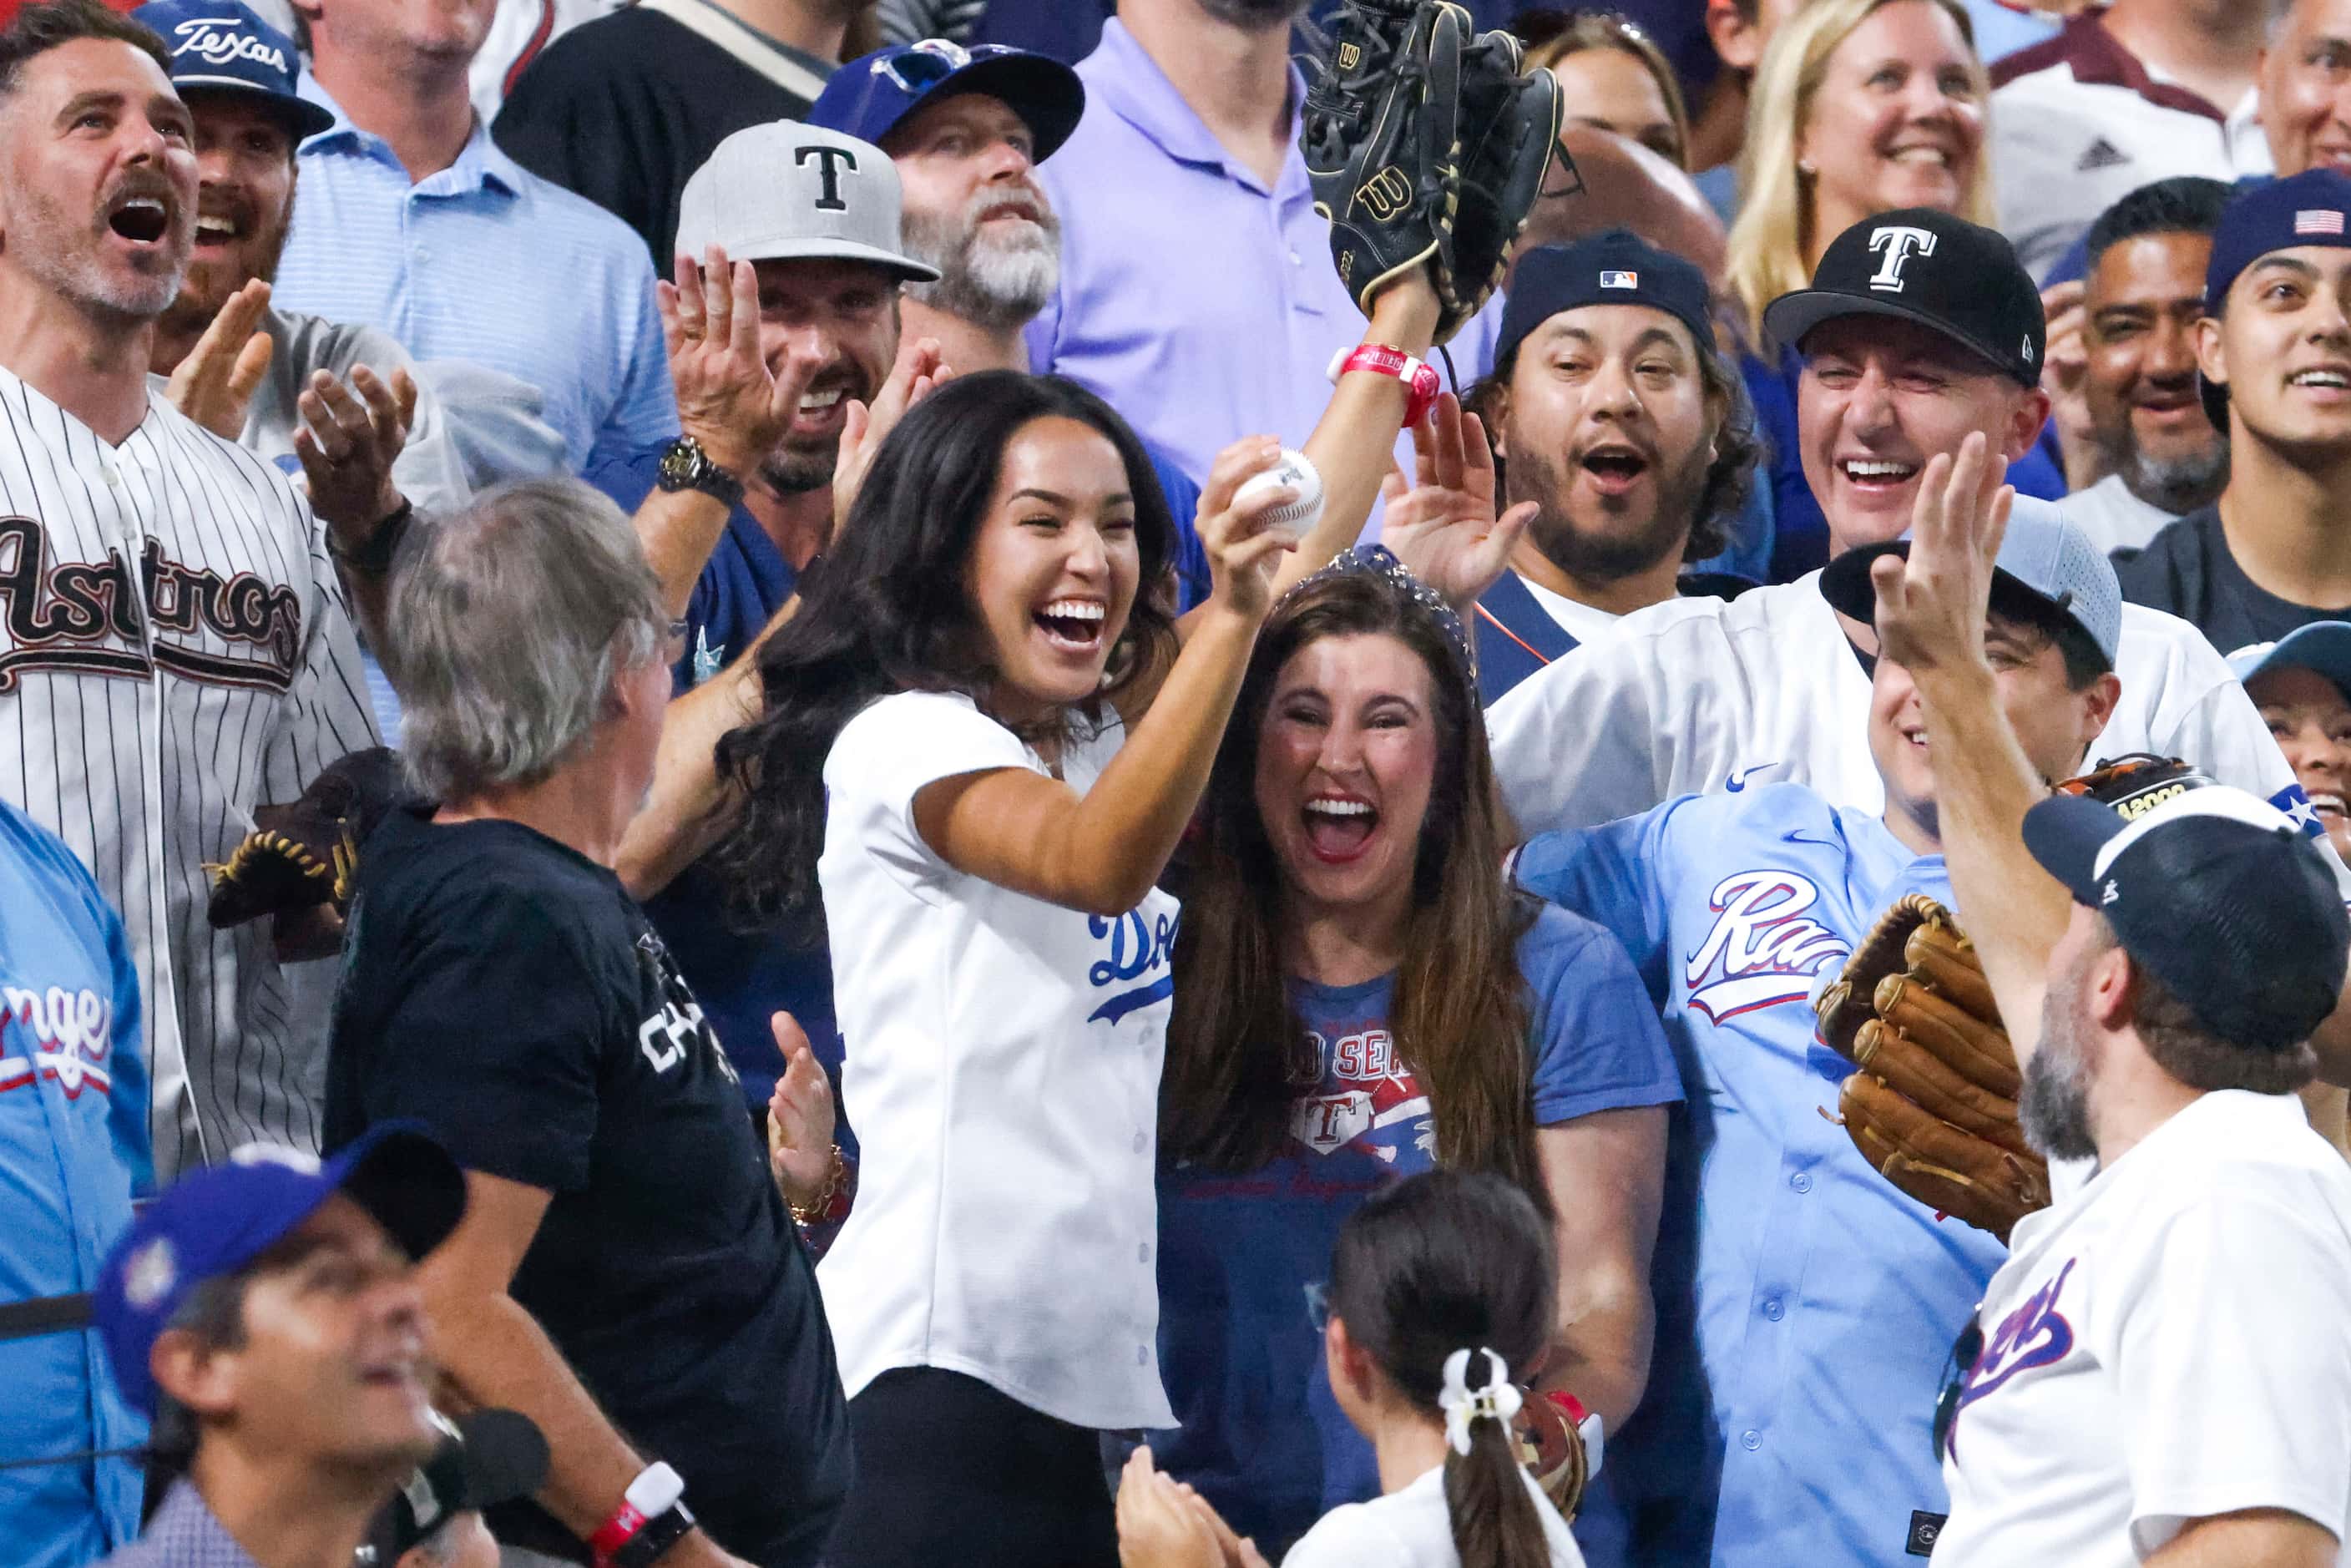 Crowd cheer after catching a homerun ball hit by Adolis Garcia of the Texas Rangers during...